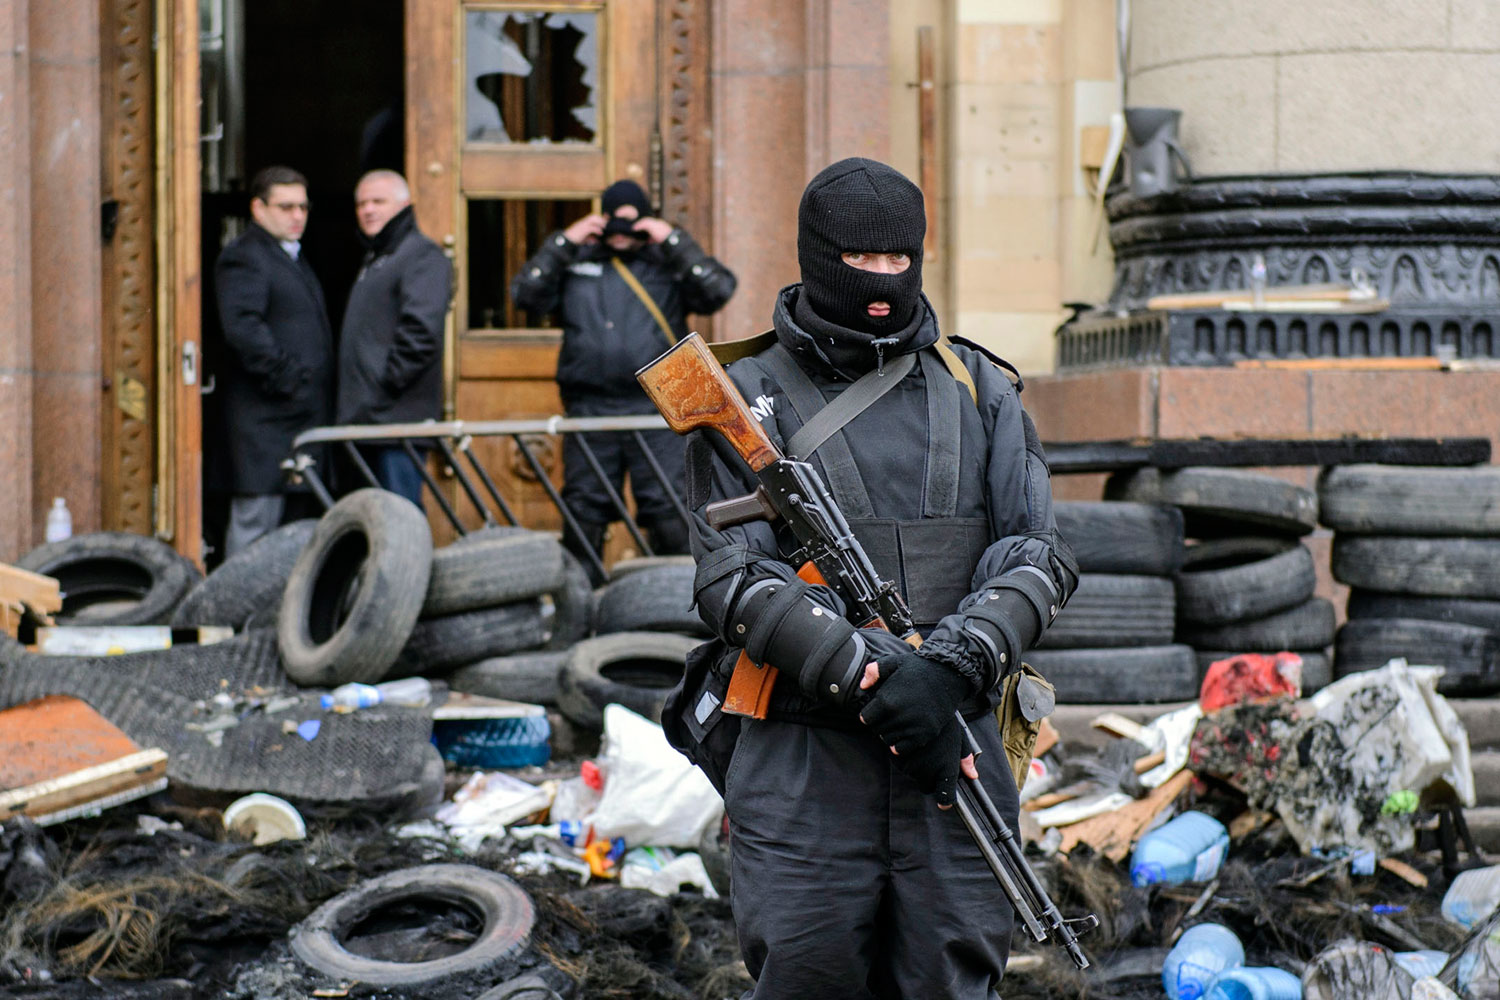 A masked member of the Ukrainian special forces stands guard outside the regional administration building in Kharkiv, April 8, 2014. (Olga Ivashchenko—Reuters)